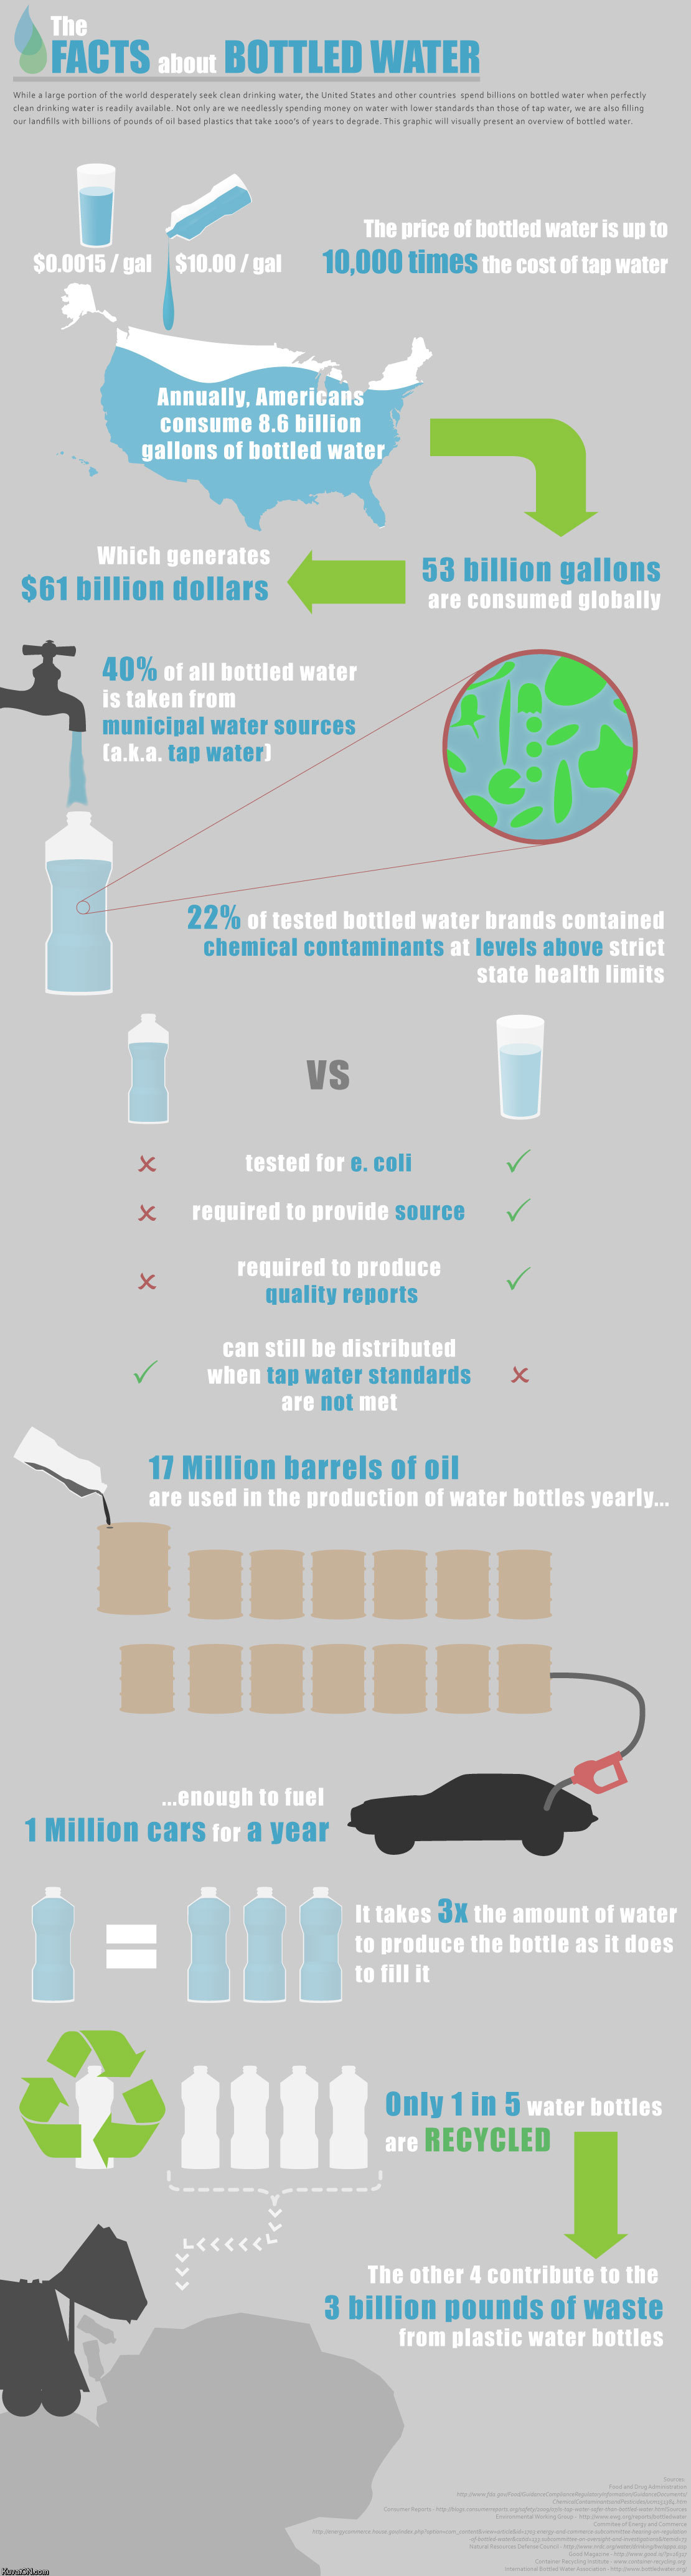 [Image: facts_about_bottled_water.jpg]